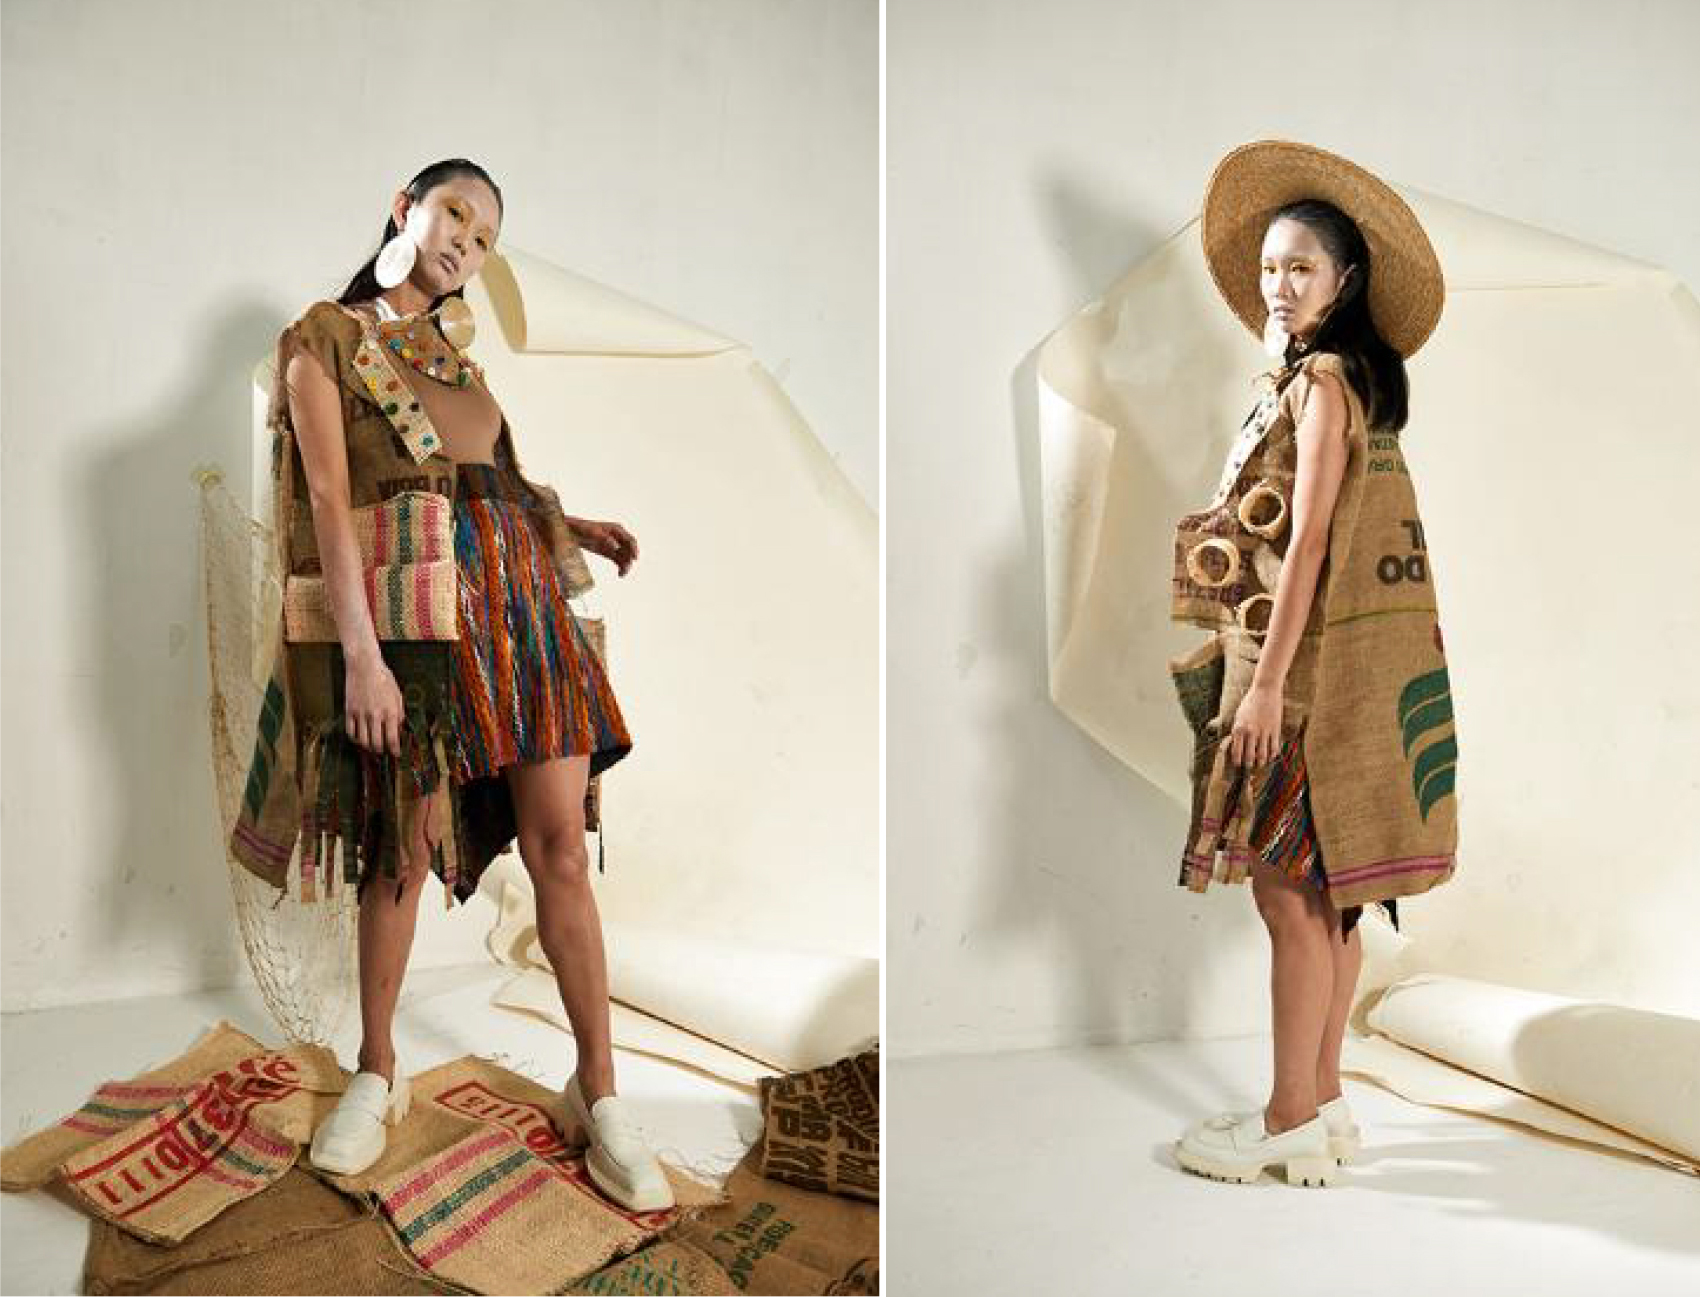 Two photos, side by side, of a woman in a vaguely indigenous couture outfit